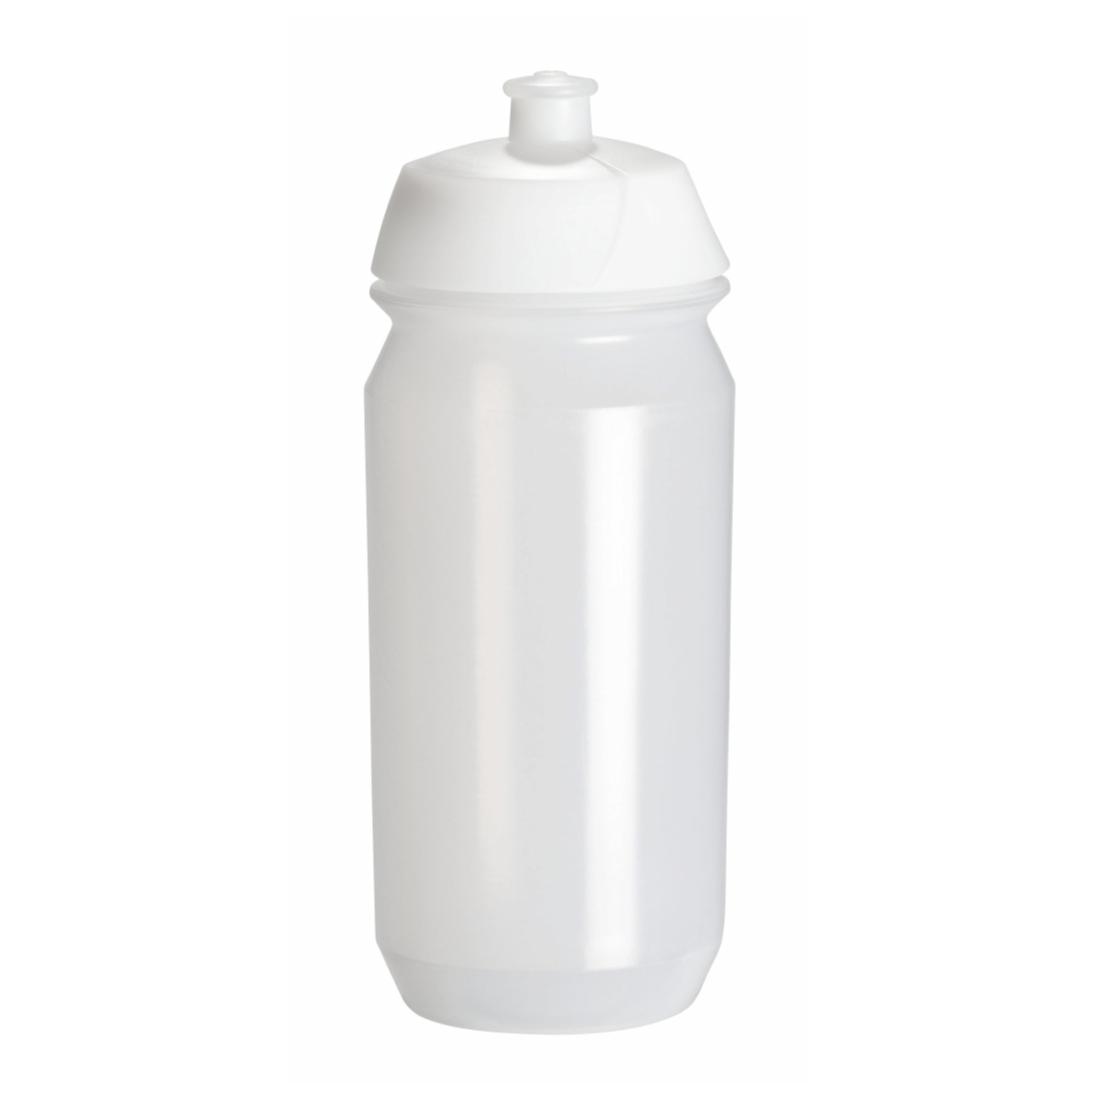 https://bicyclewaterbottle.com/wp-content/uploads/2019/11/tacx-shiva-bicycle-sport-water-bottle-500ml-white-transparent.jpg